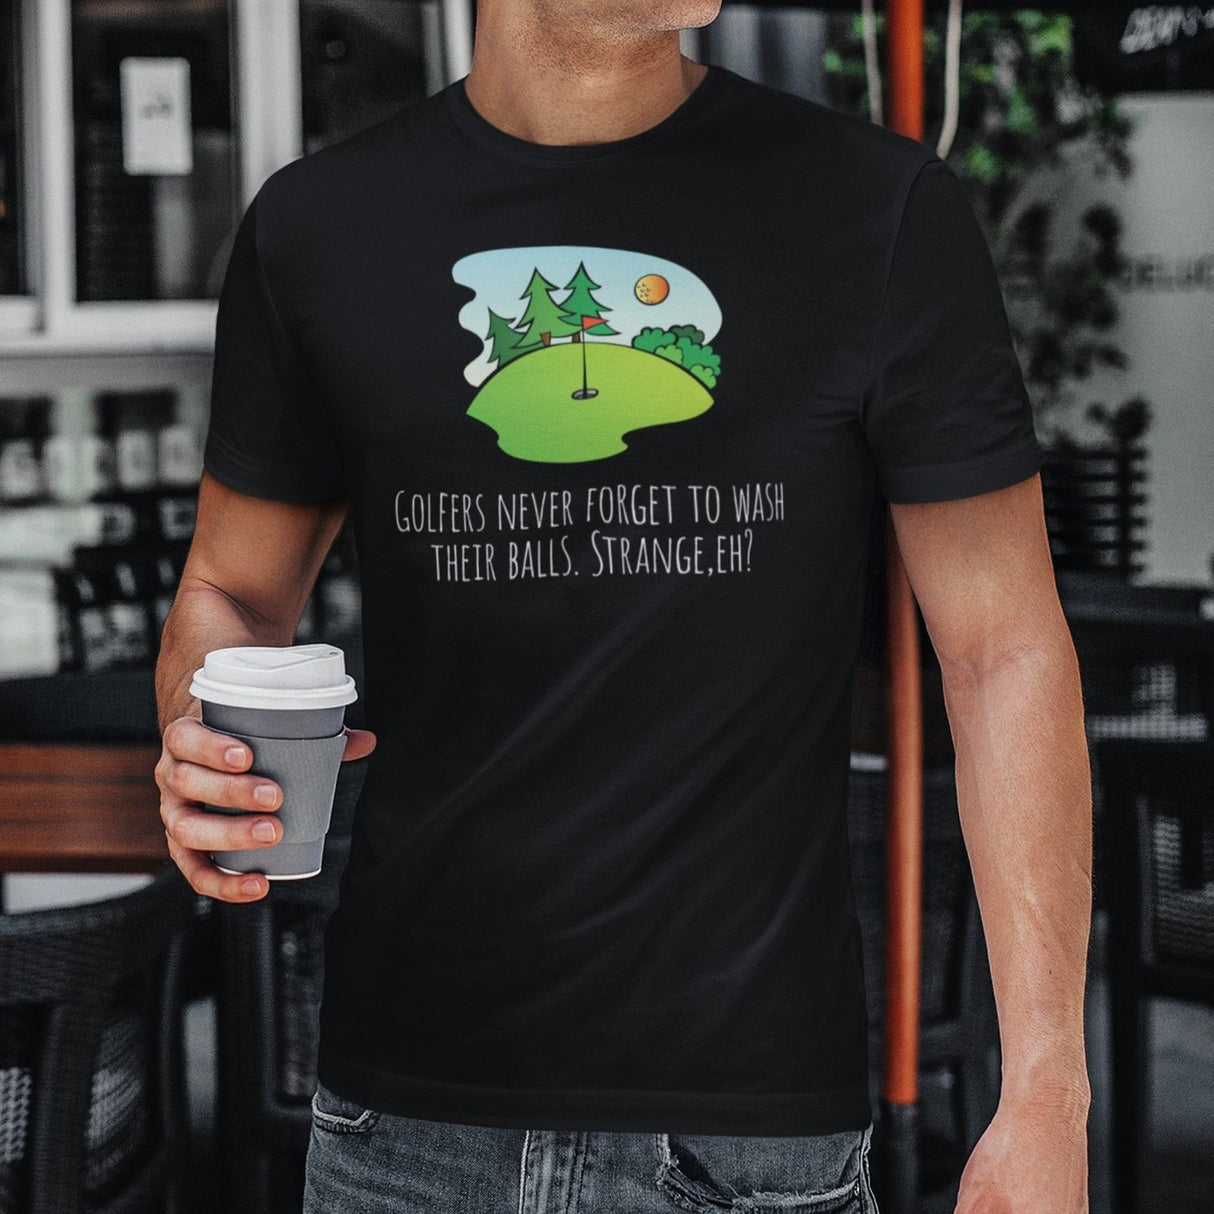 golfers-never-forget-to-wash-their-balls-strange-eh-golf-tee-golfer-t-shirt-golfing-tee-funny-t-shirt-crude-tee#color_black